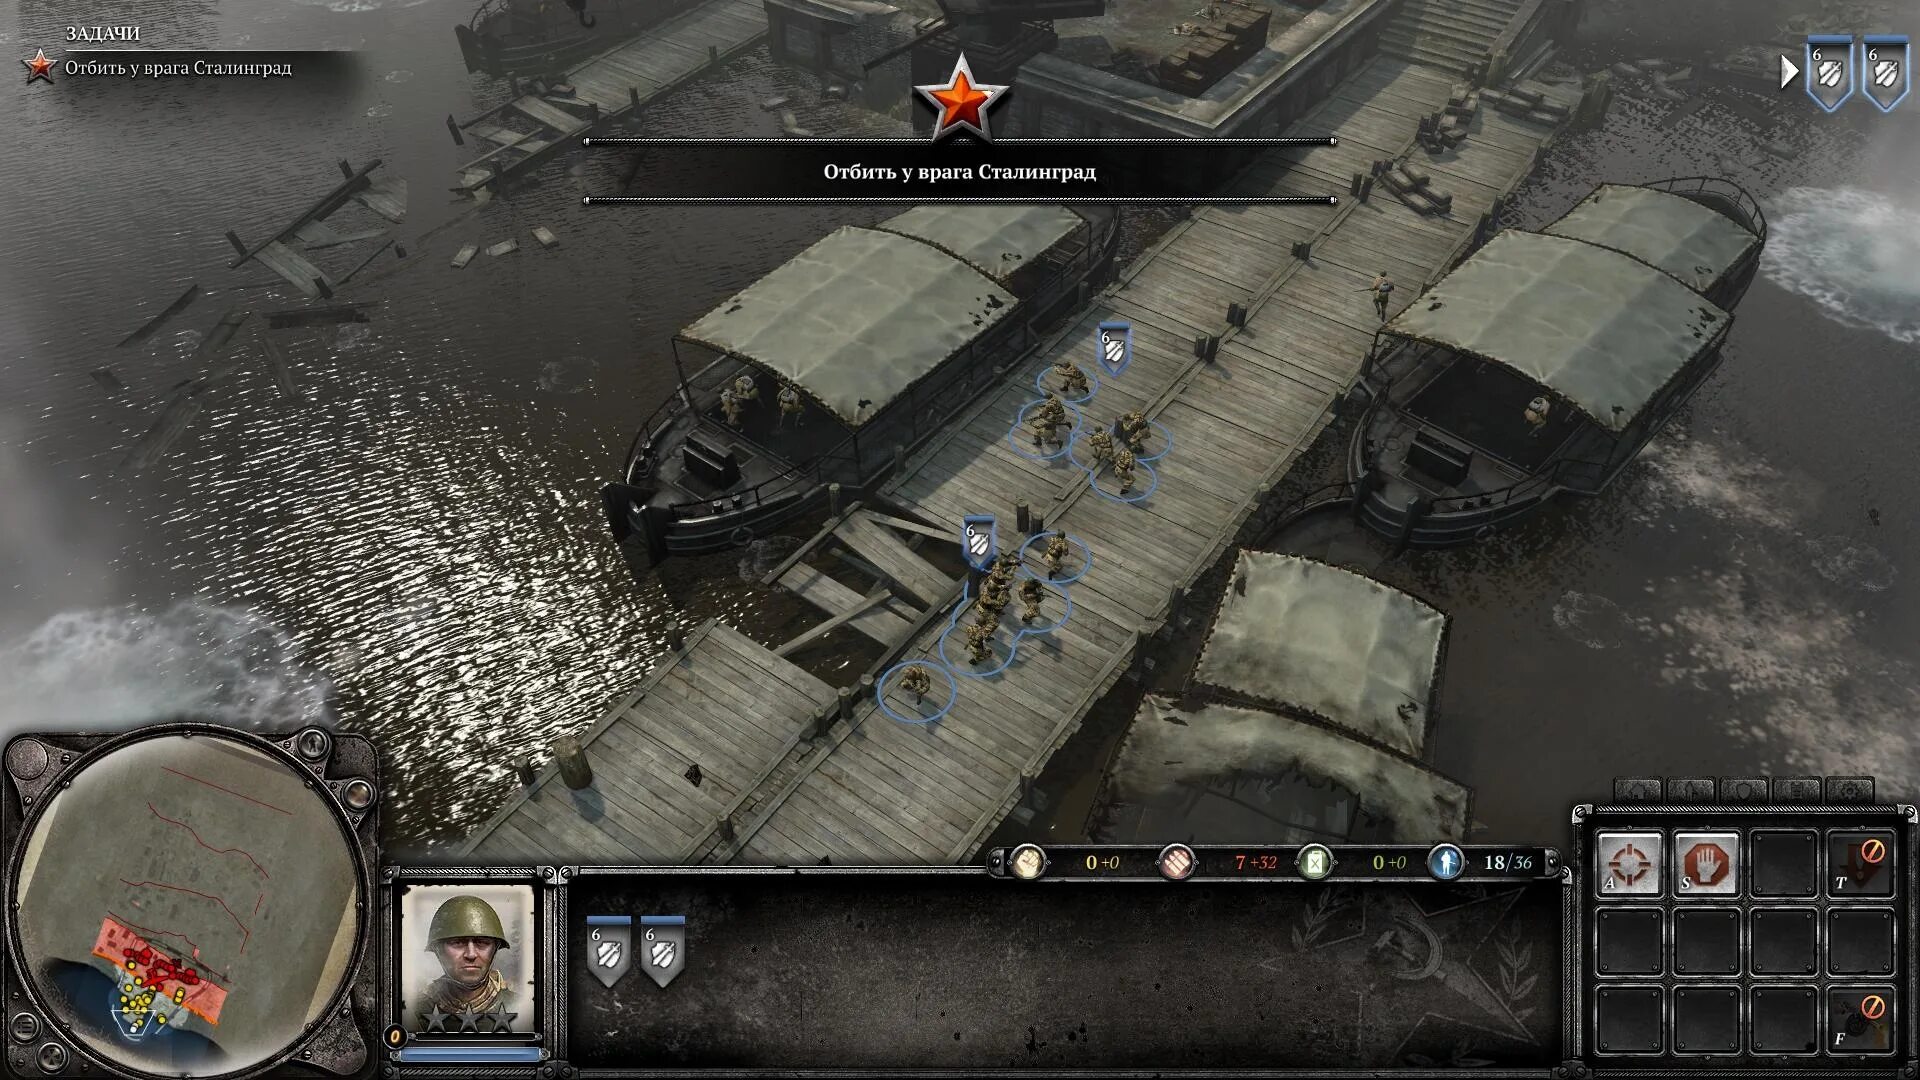 Company of heroes 3 русский. Company of Heroes 2 Чуркин. Company of Heroes 2. Company of Heroes 1 меню. Игра Company of Heroes 2.